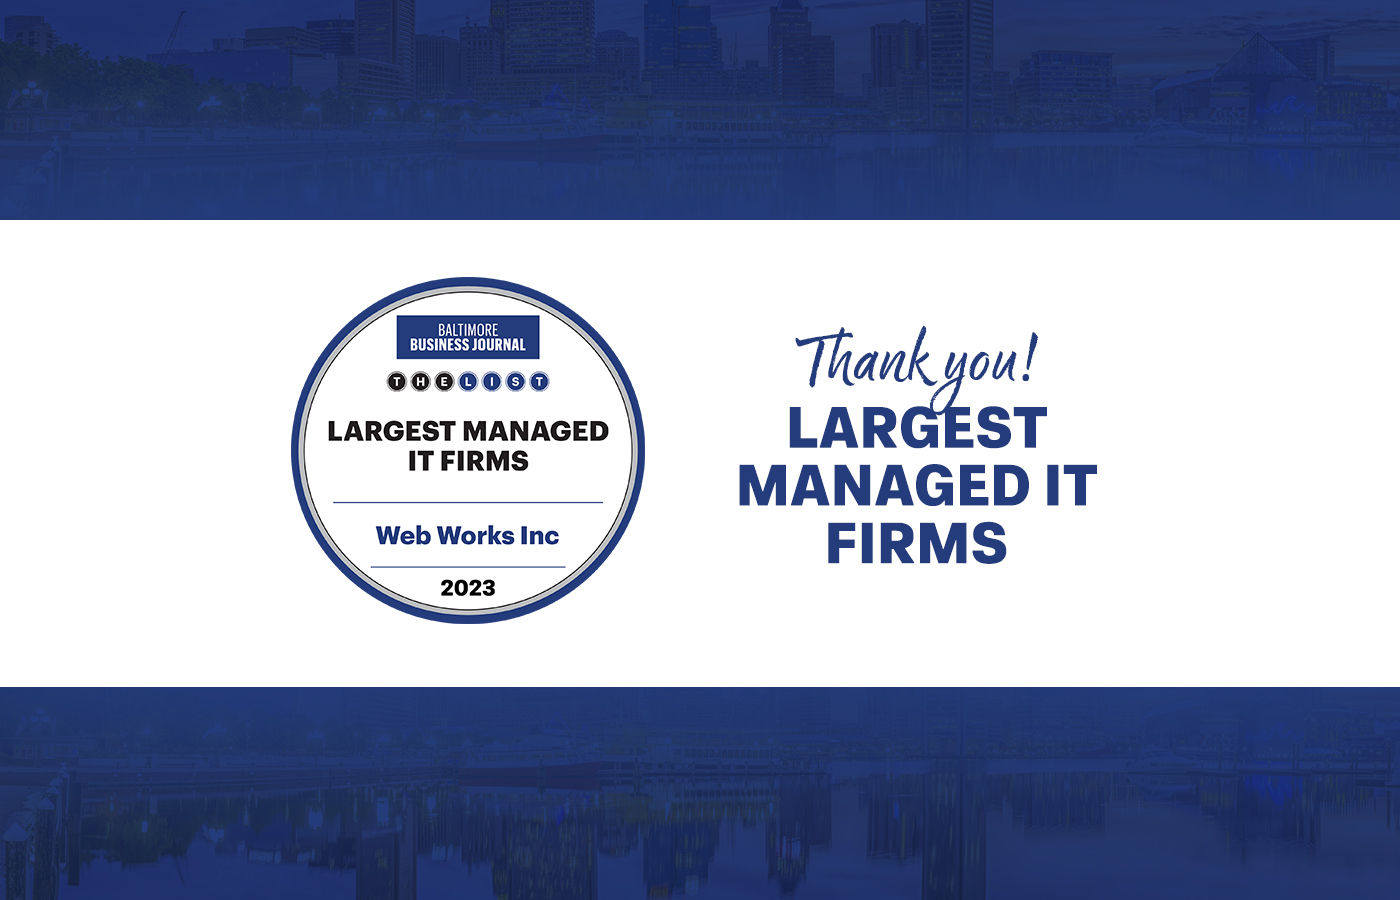 Web Works Inc named one of Baltimore's Largest Managed IT Firms 2023 by the Baltimore Business Journal